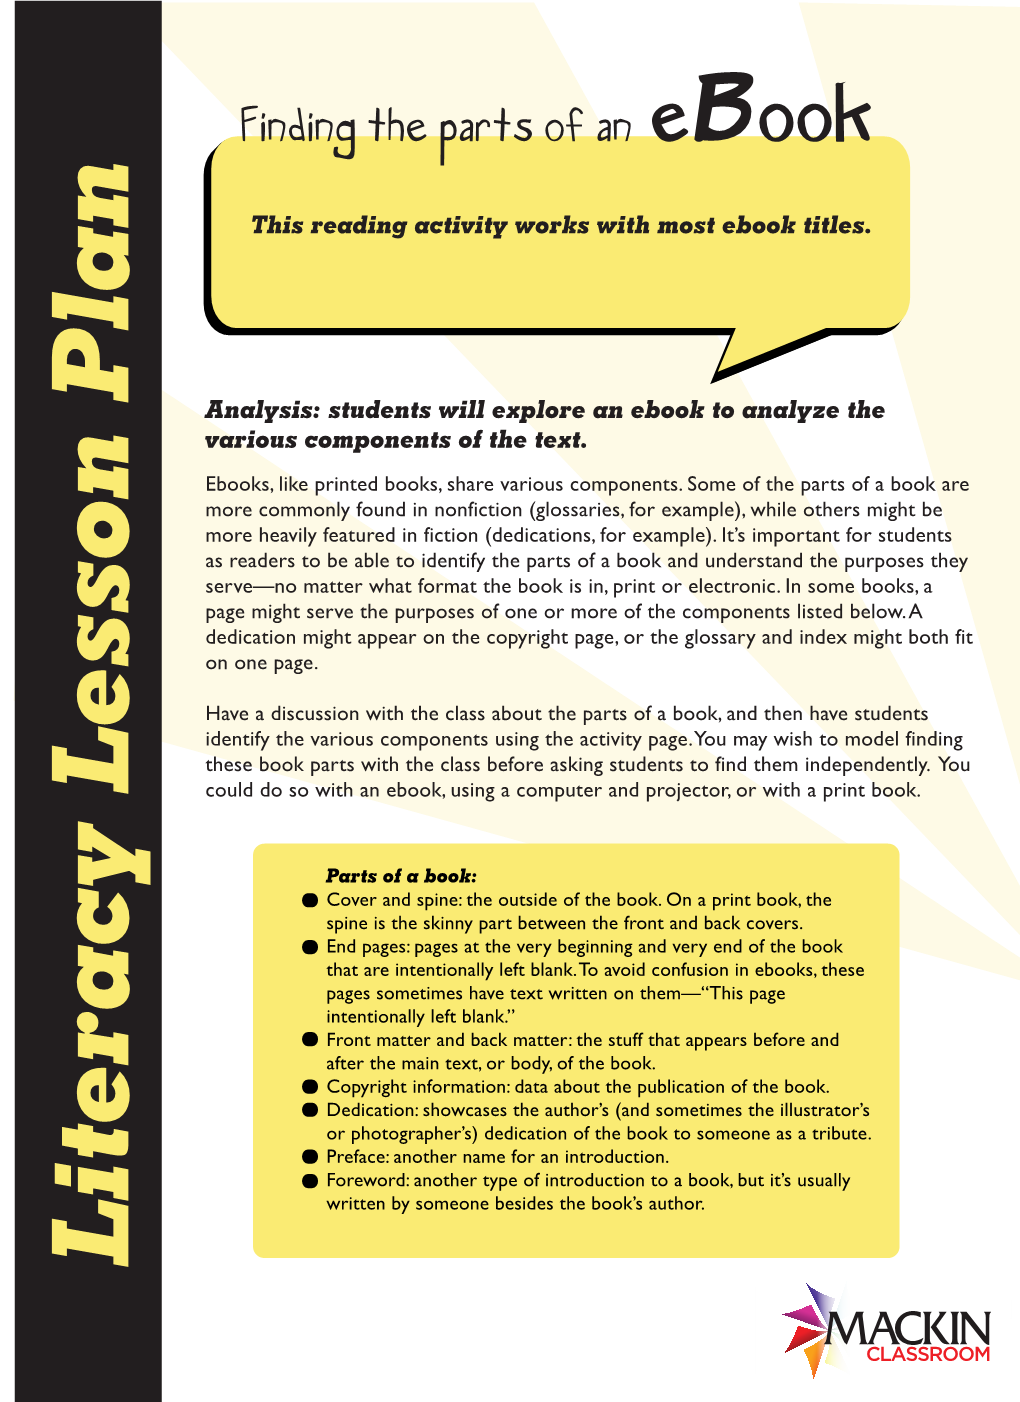 Literacy Lesson Plan Could Dosowithanebook, Usingacomputerandprojector, Orwithaprintbook